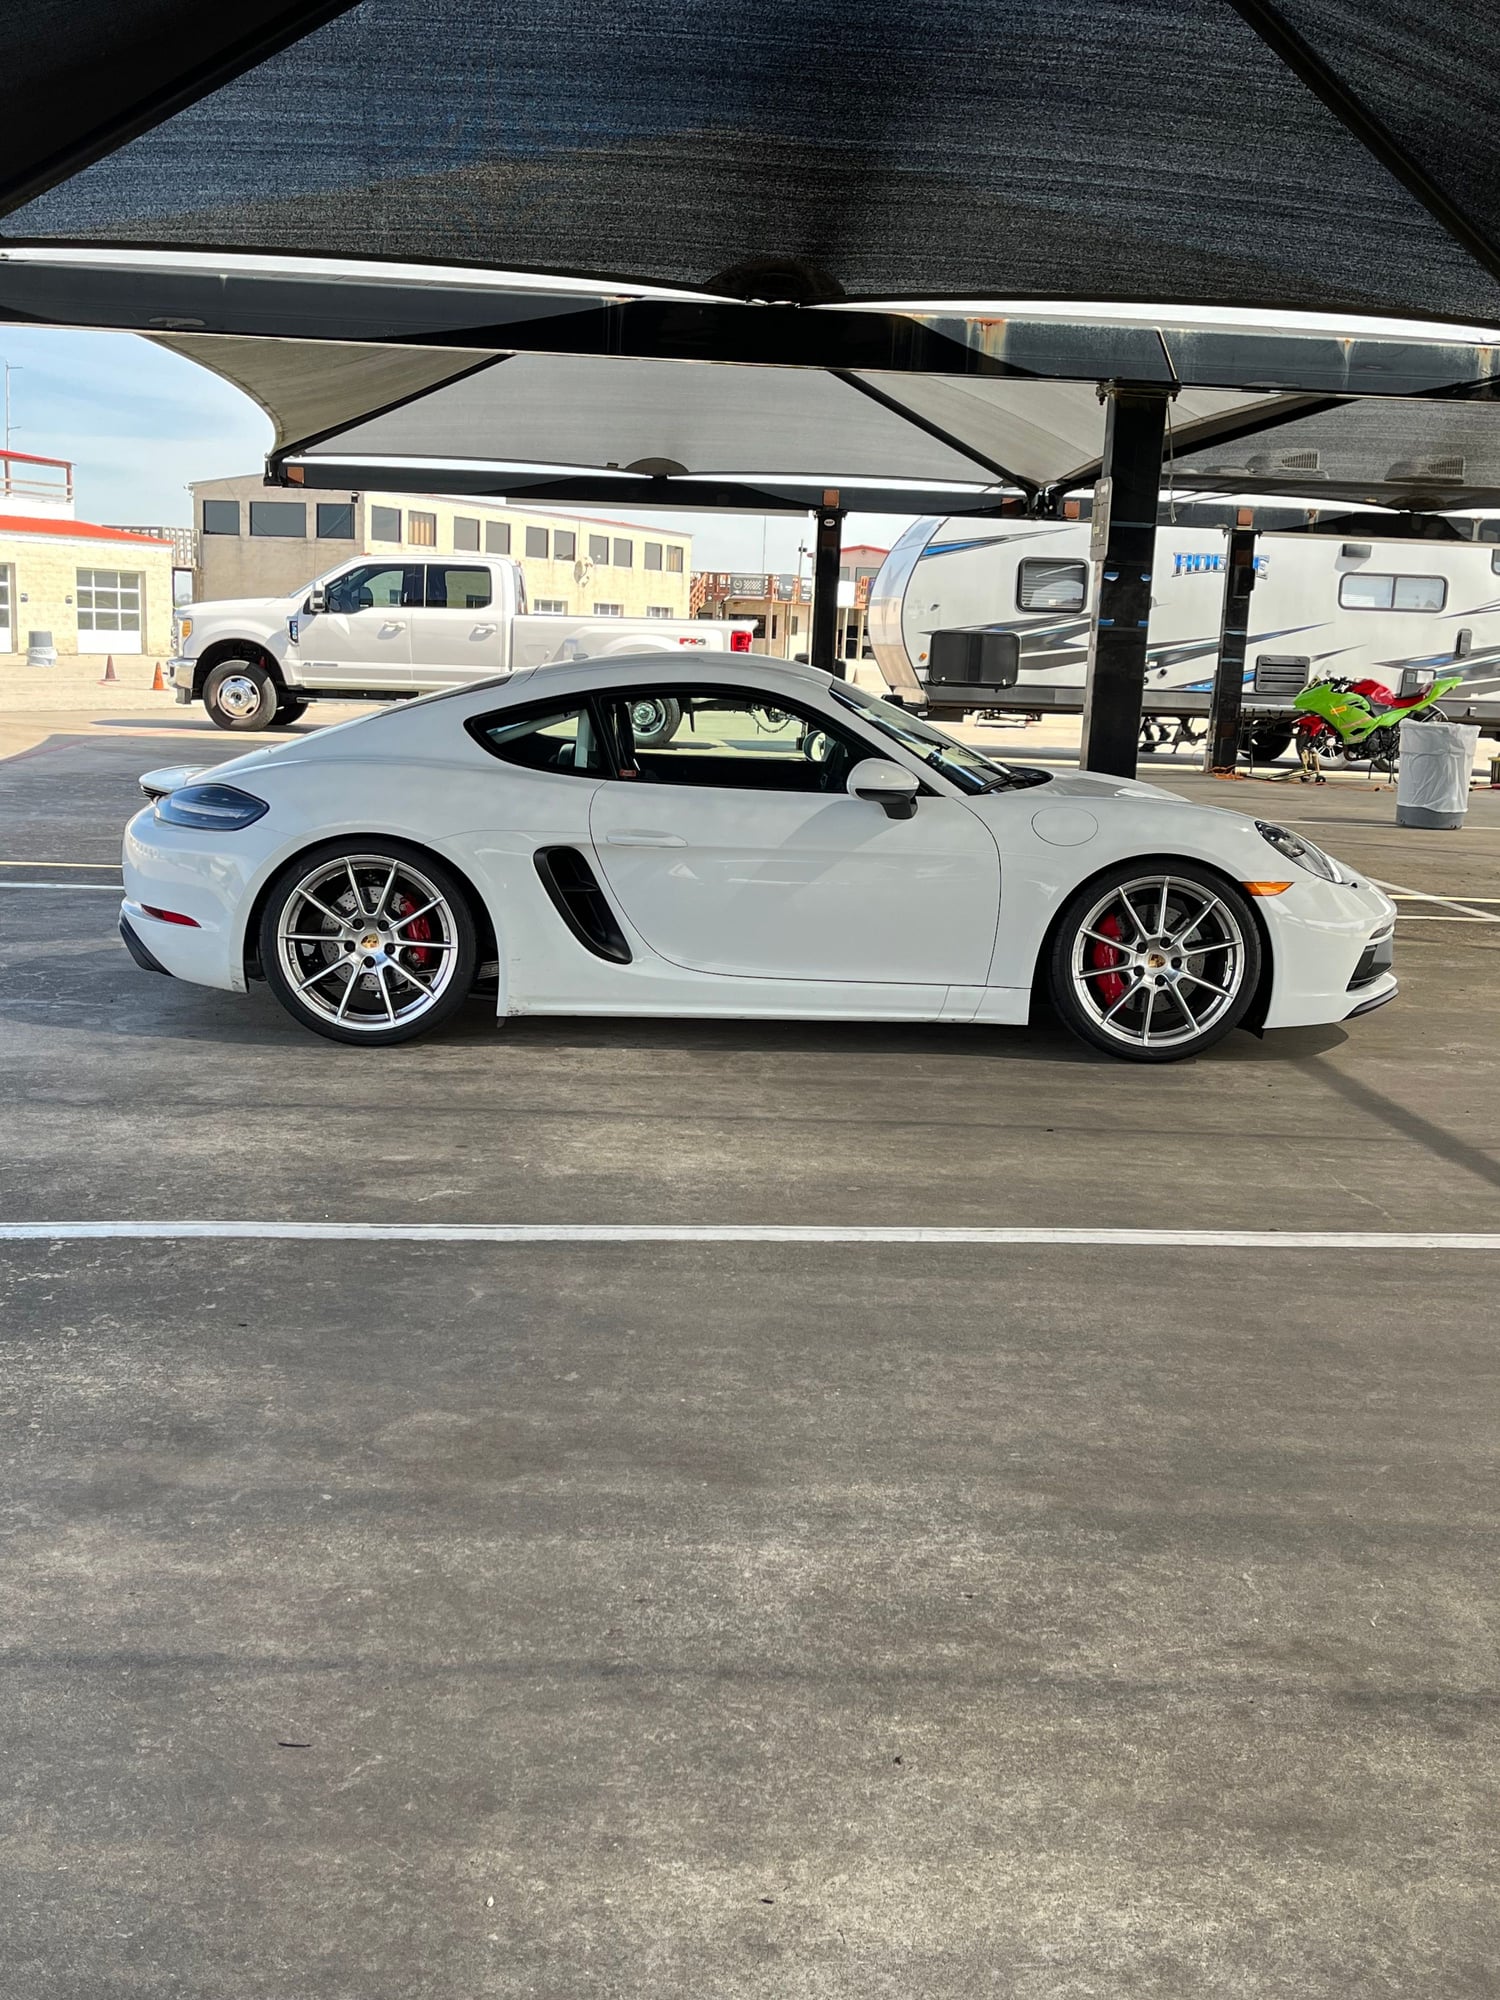 2023 Porsche 718 - 2023 Track prepped 718 Cayman GTS 4.0 For Sale - Used - VIN WP0AD2A89PS271002 - 1,400 Miles - 6 cyl - 2WD - Manual - Coupe - White - Houston, TX 77019, United States